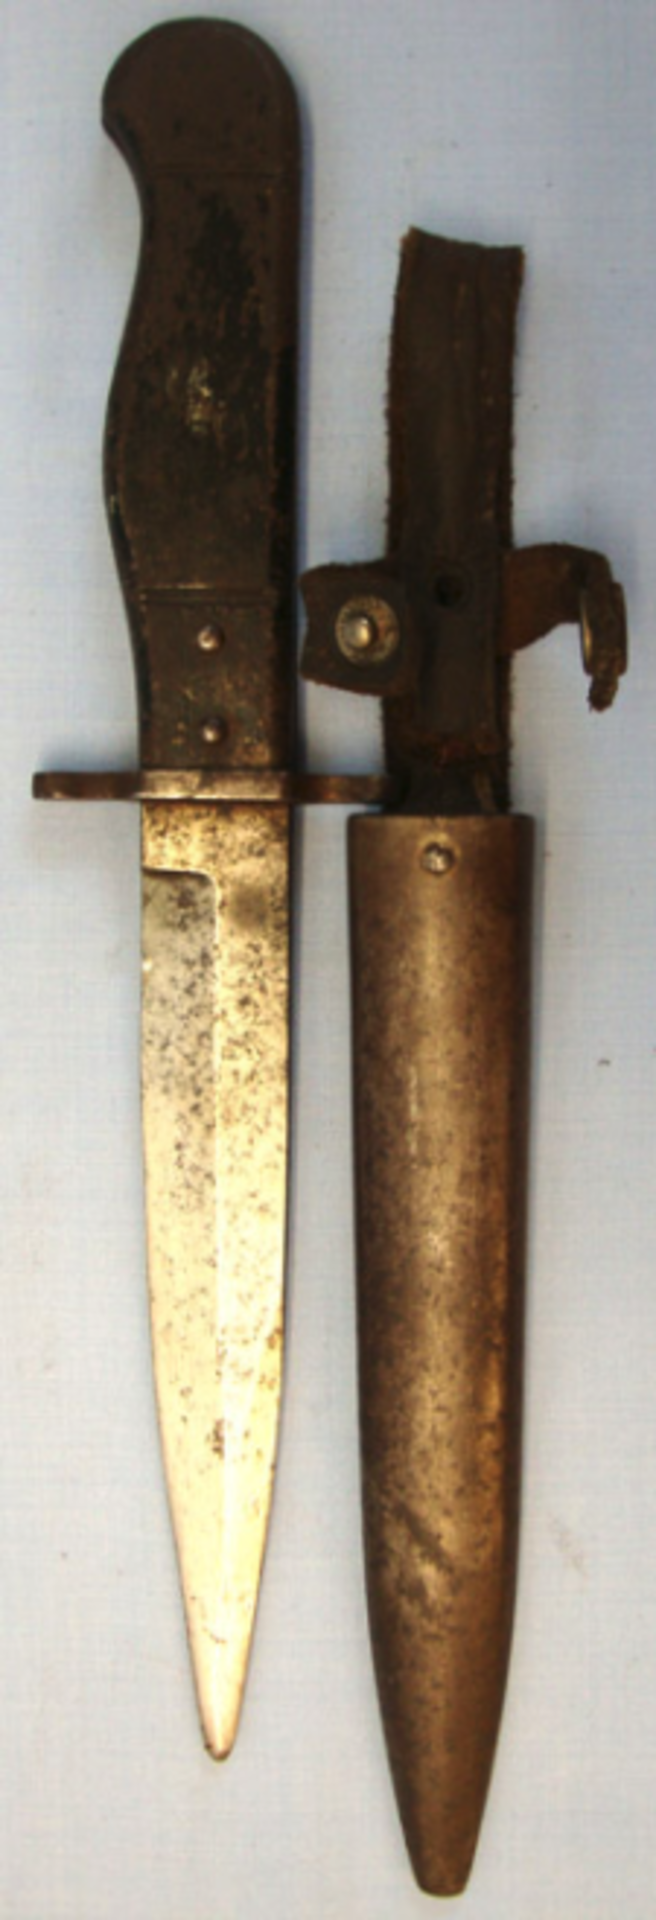 Unusual WW1 German Steel Hilted Trench Knife with Hilt Stamped 'GES Gesh'